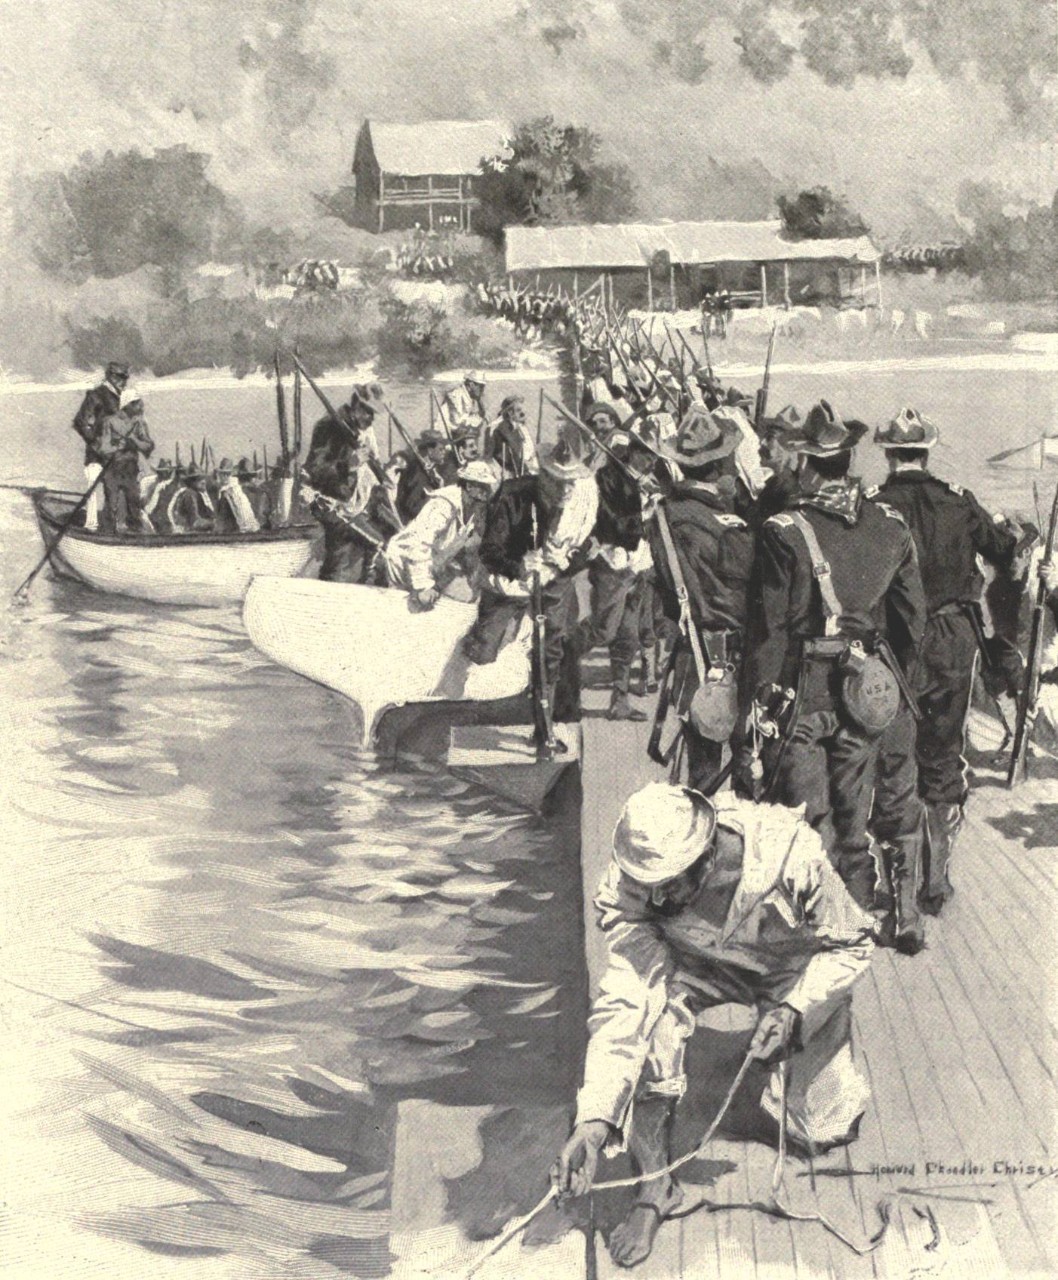 An artist's rendition of the landing at the docks of Guanica in Puerto Rico.